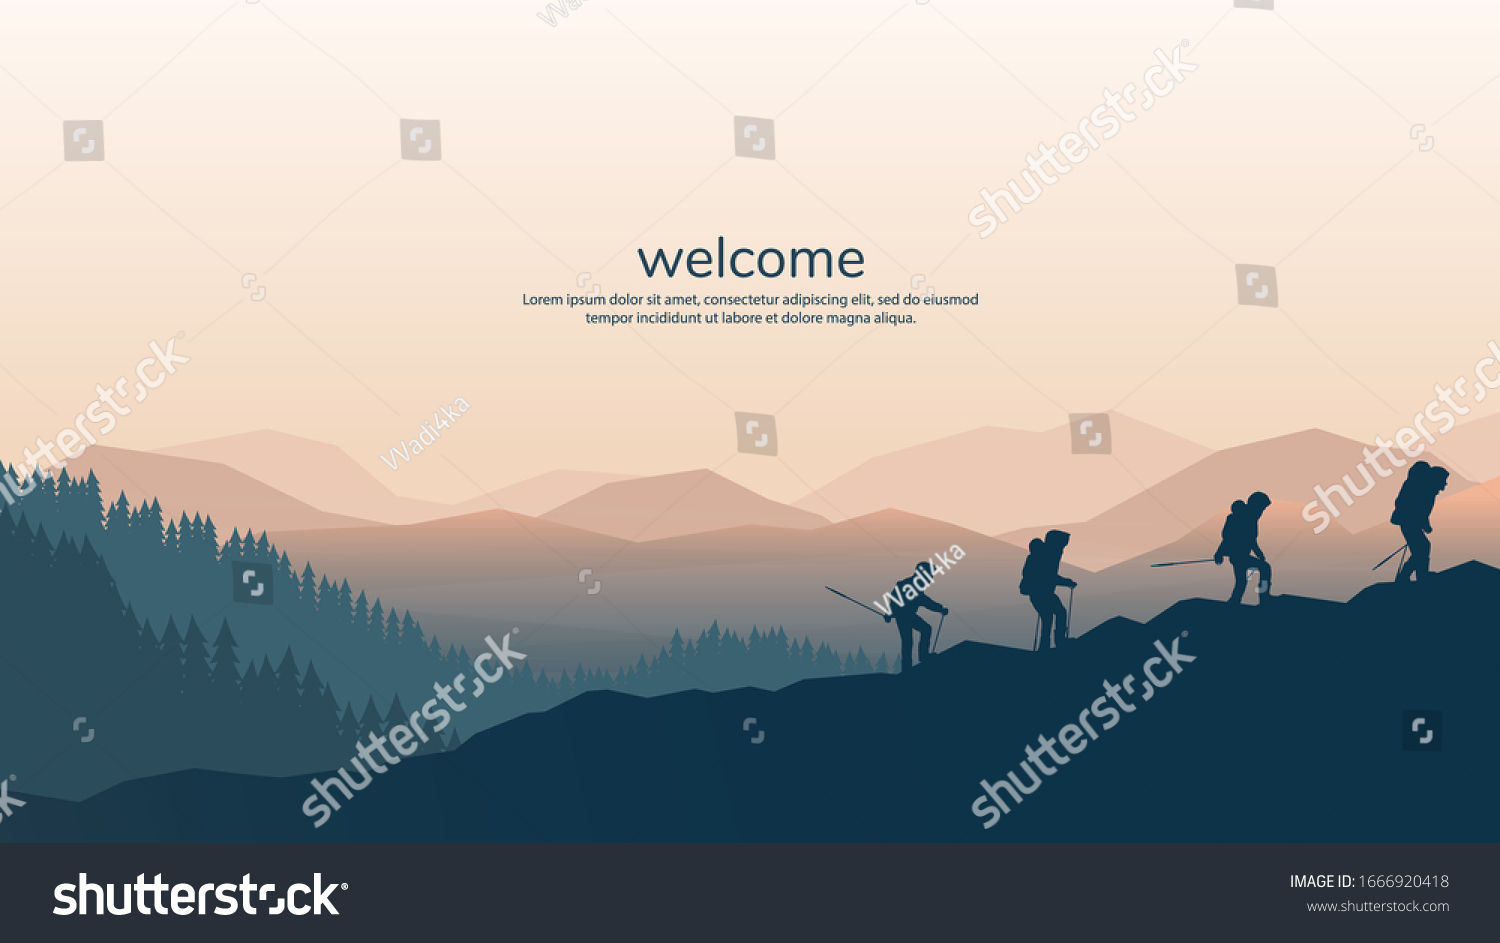 Vector background with tourists. Travel concept of discovering, exploring and observing nature. Hiking. Travelers climb with backpack and travel walking sticks. Website template. Flat landscape